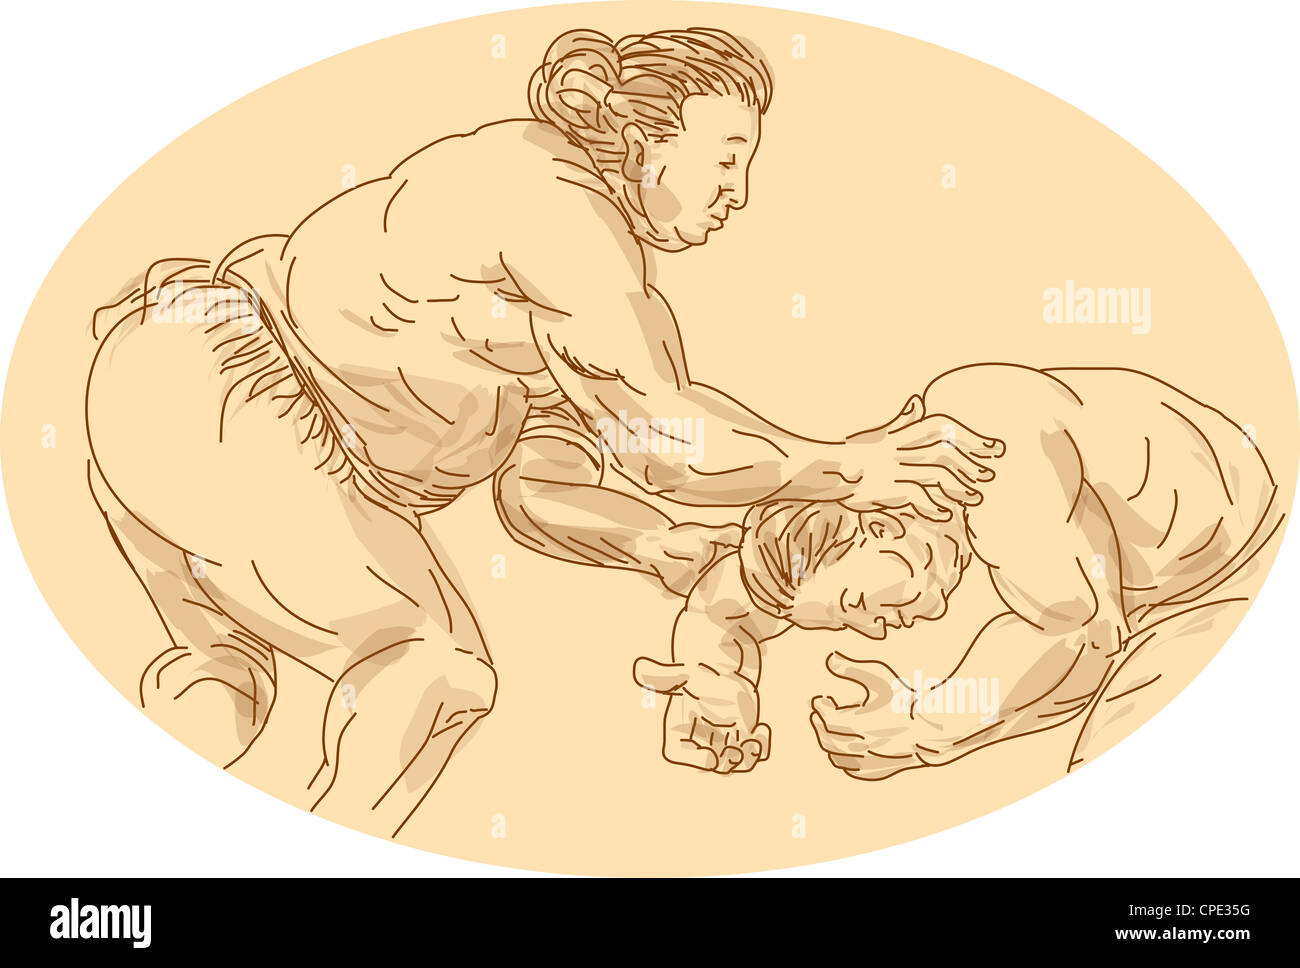 Hand drawn and sketched illustration of two sumo wrestlers wrestling viewed from the side set inside ellipse. Stock Photo